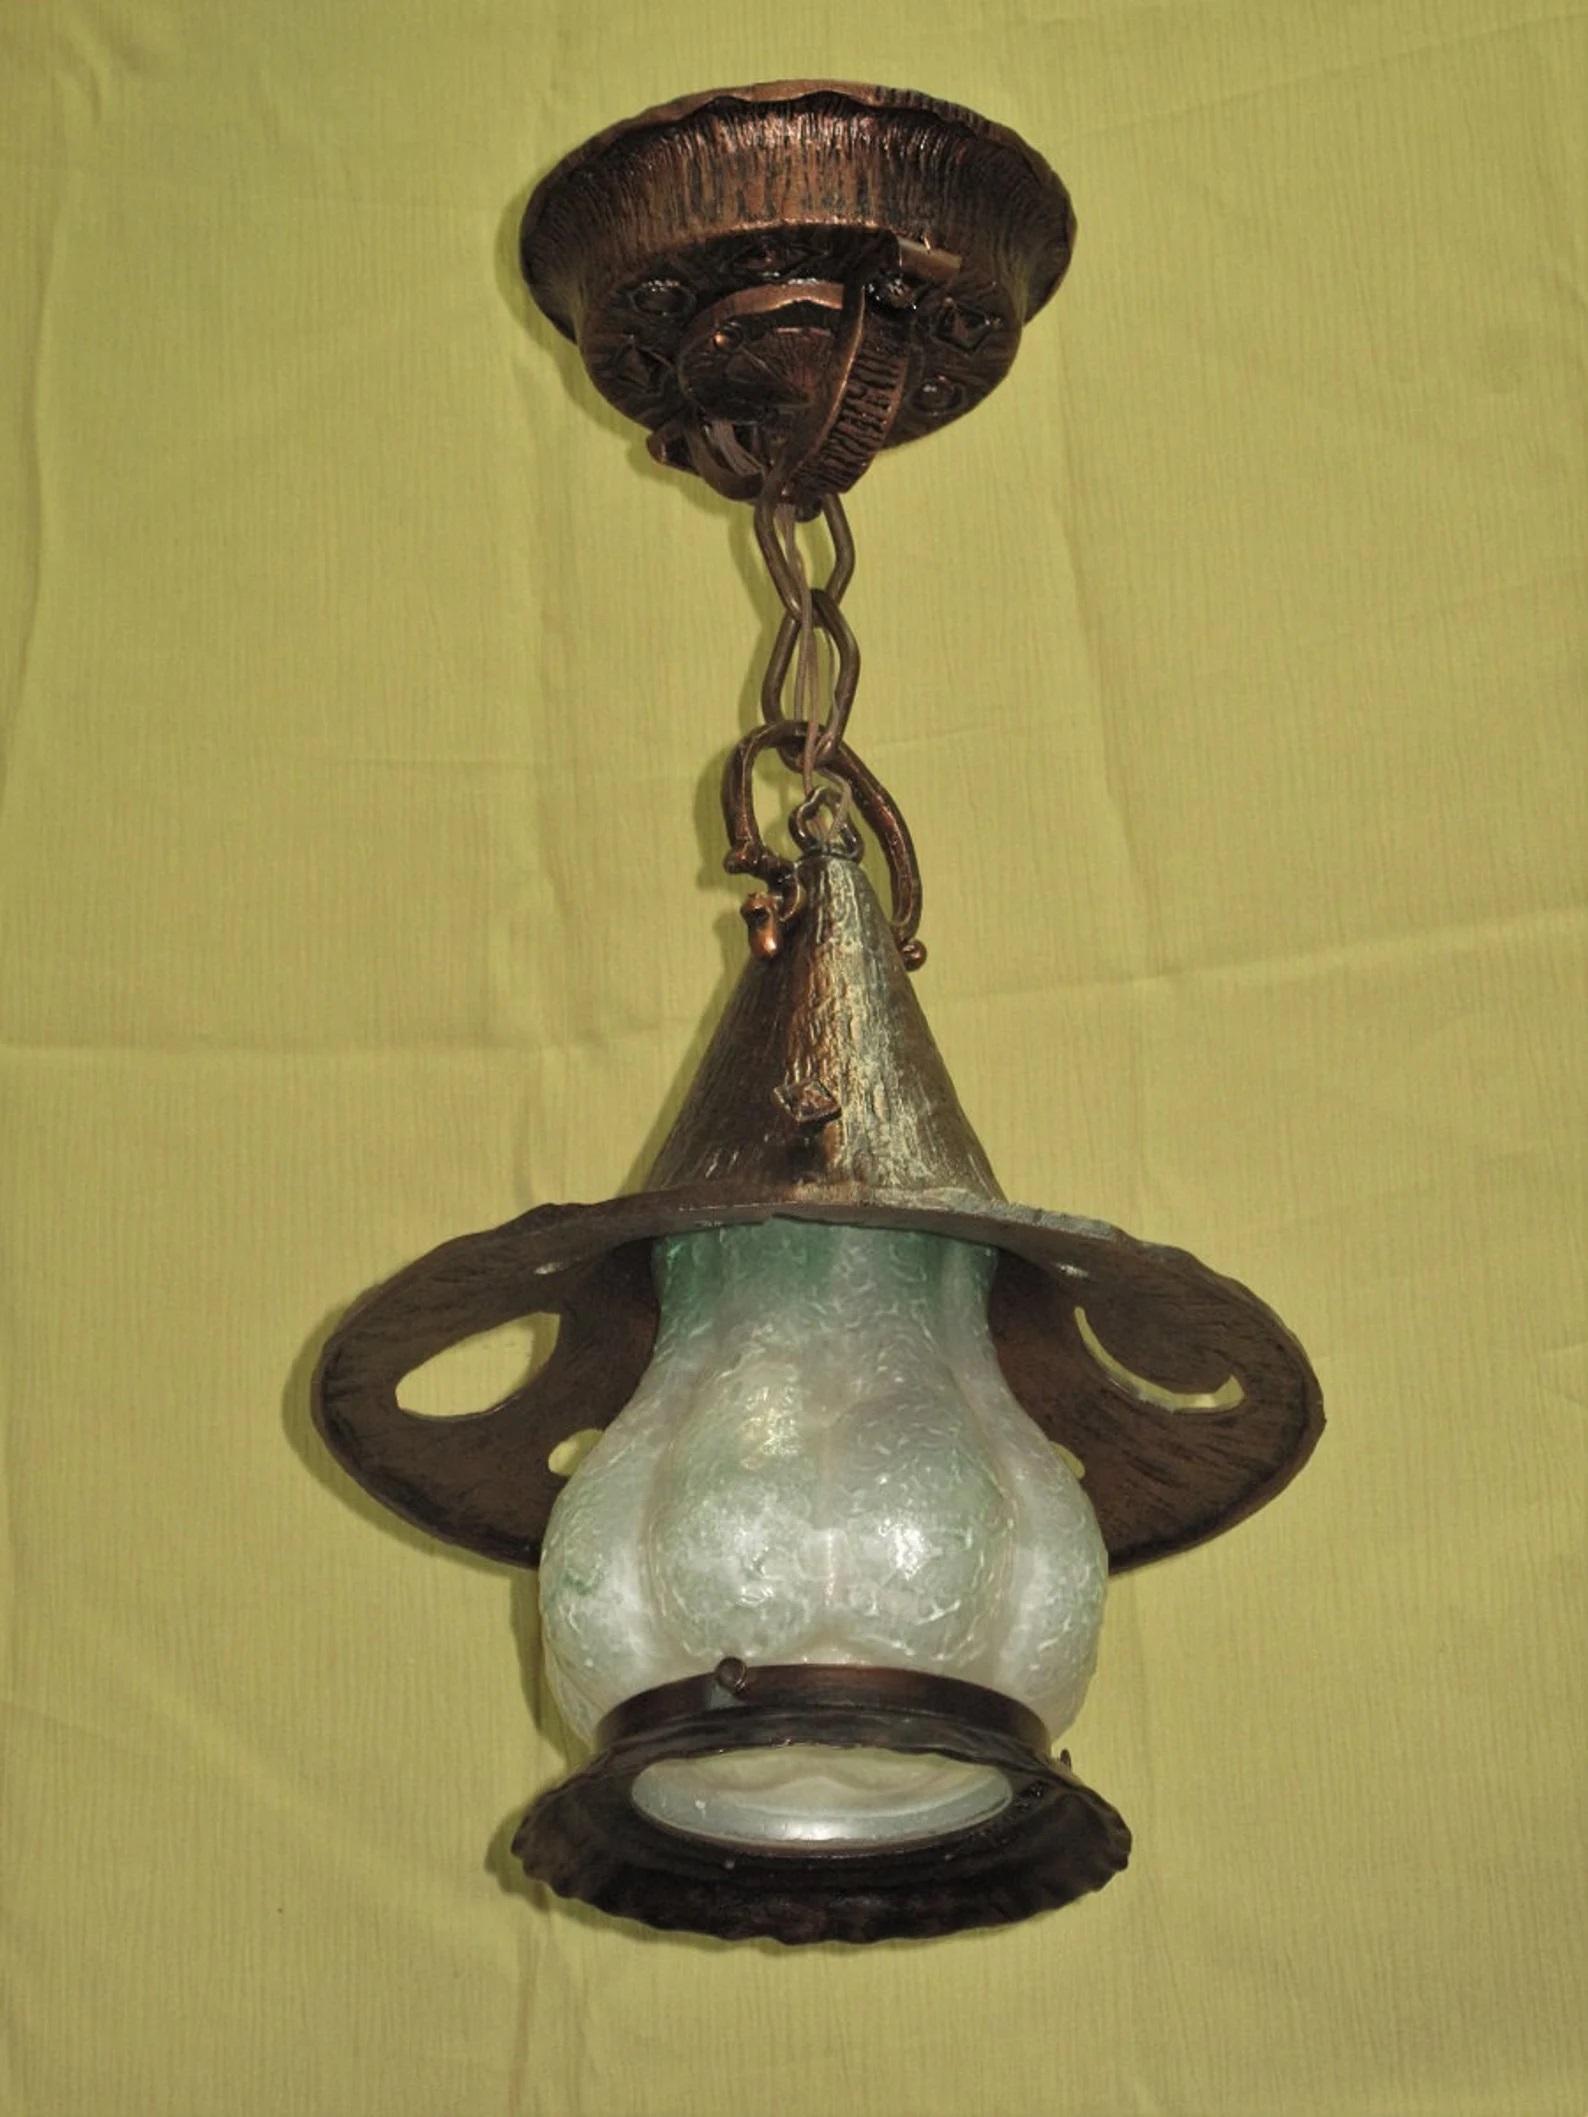 American 1920s / 30s Storybook Style Witches Hat Porch Light with Moon Sun & Stars